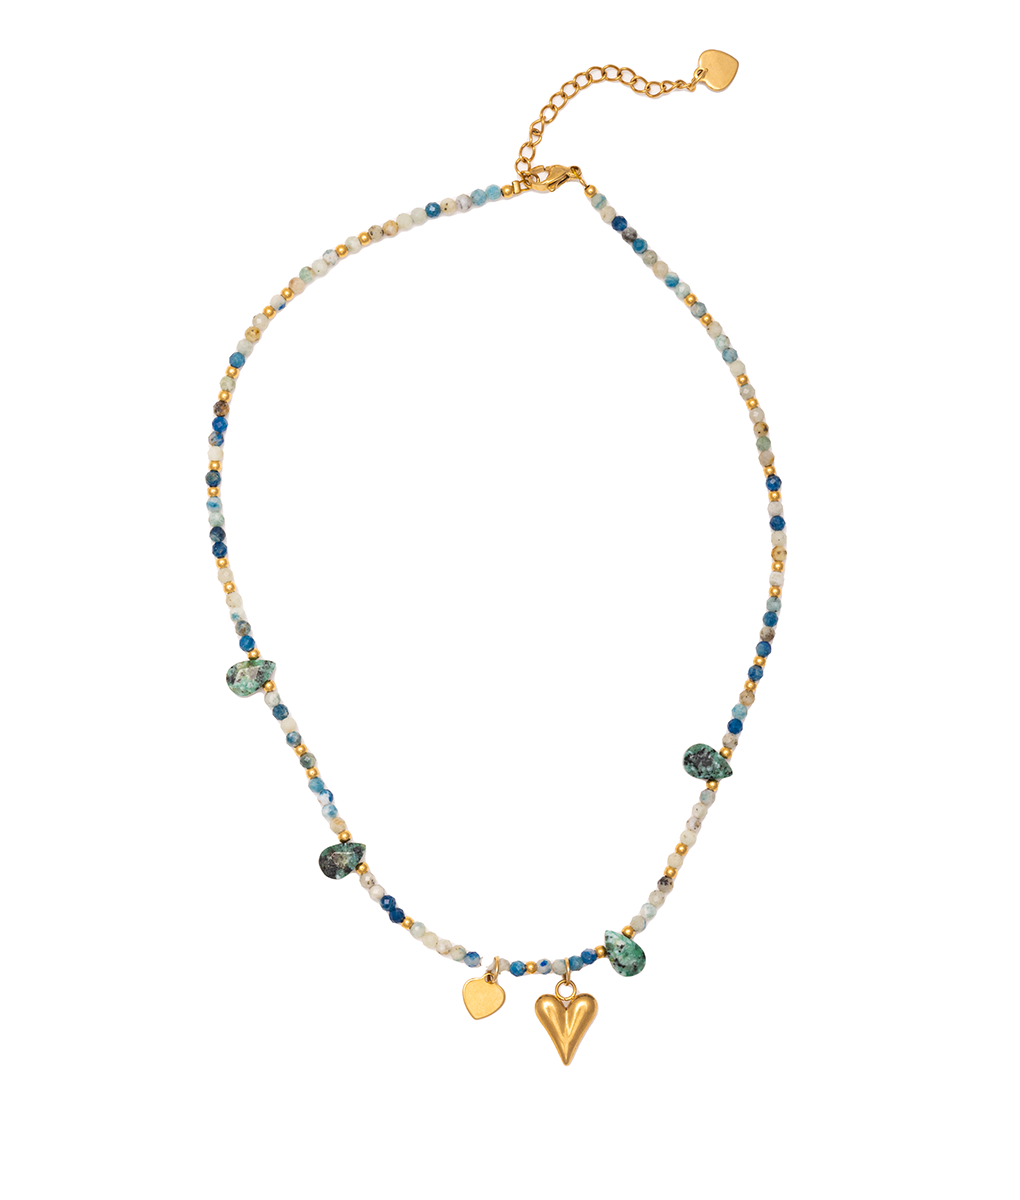 The Coral Breeze Necklace